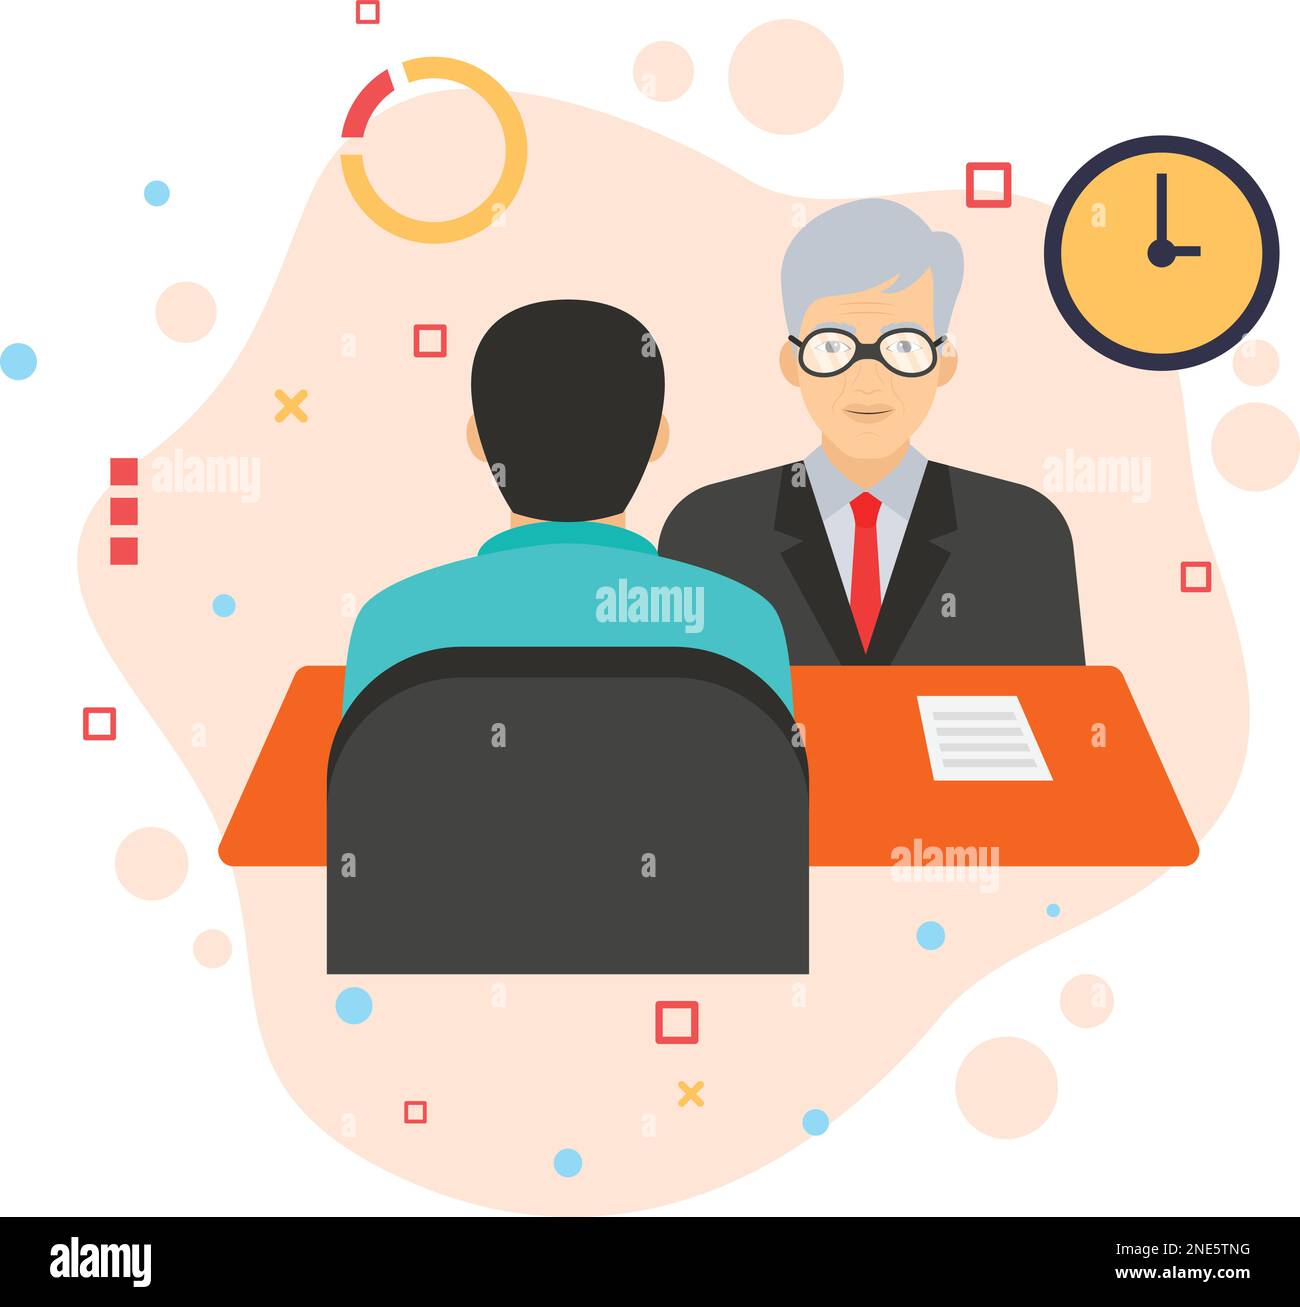 Executive recruiting the people sign, Job Interview Concept, hrm symbol, Candidate Screening Process Vector Icon Design,  Business Meeting Stock illus Stock Vector